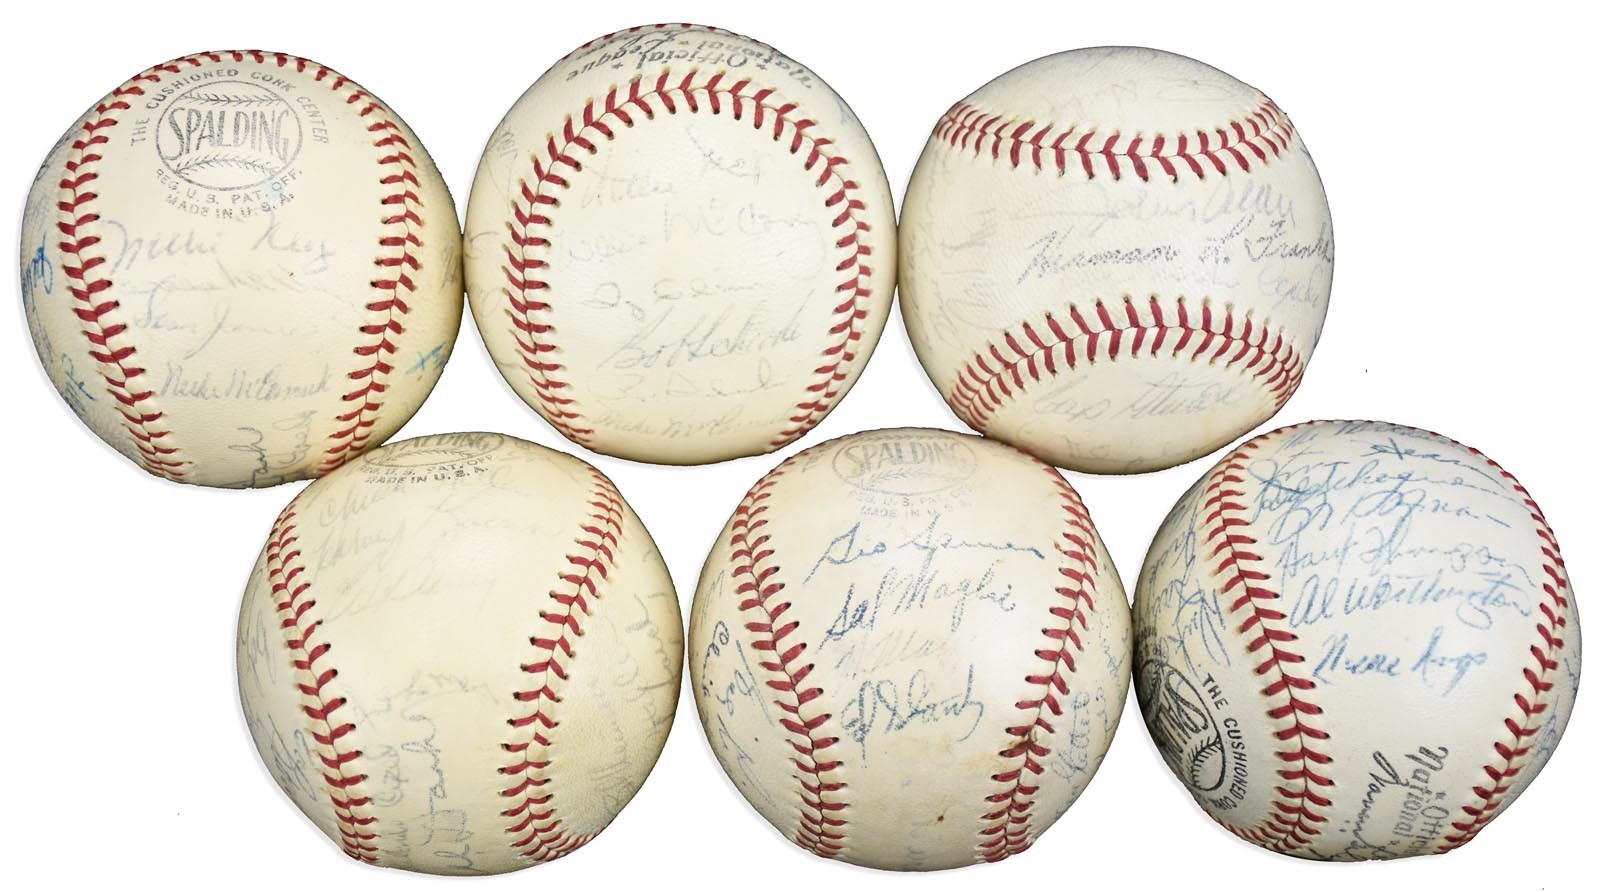 NY Yankees, Giants & Mets - 1951-68 NY/SF Giants Team Signed Baseballs ALL with Willie Mays - No Clubhouse (6)